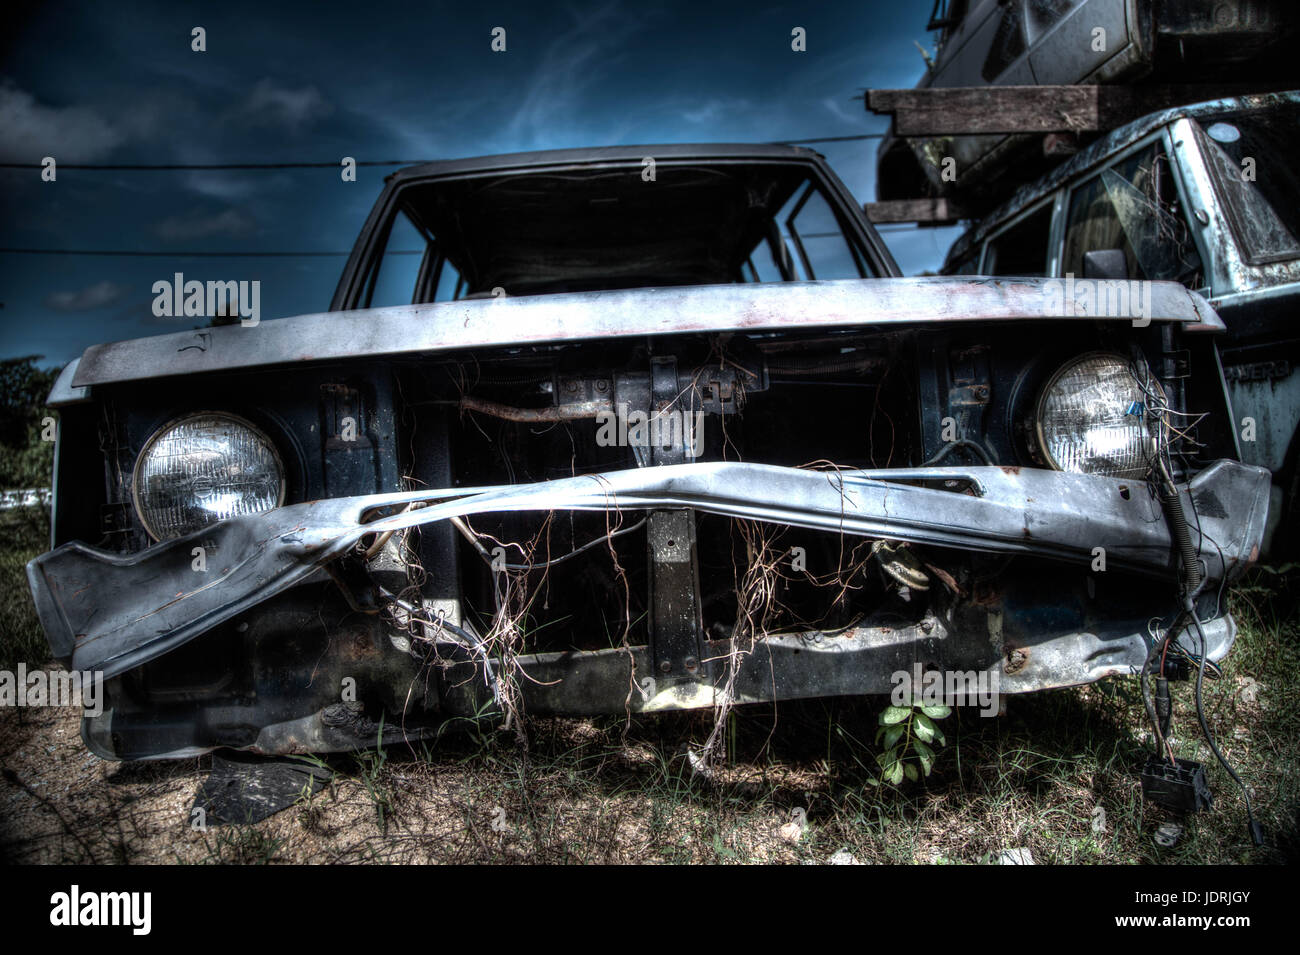 Front view HDR photo of Wrecked Automobile in Junkyard in Malaysia Stock Photo